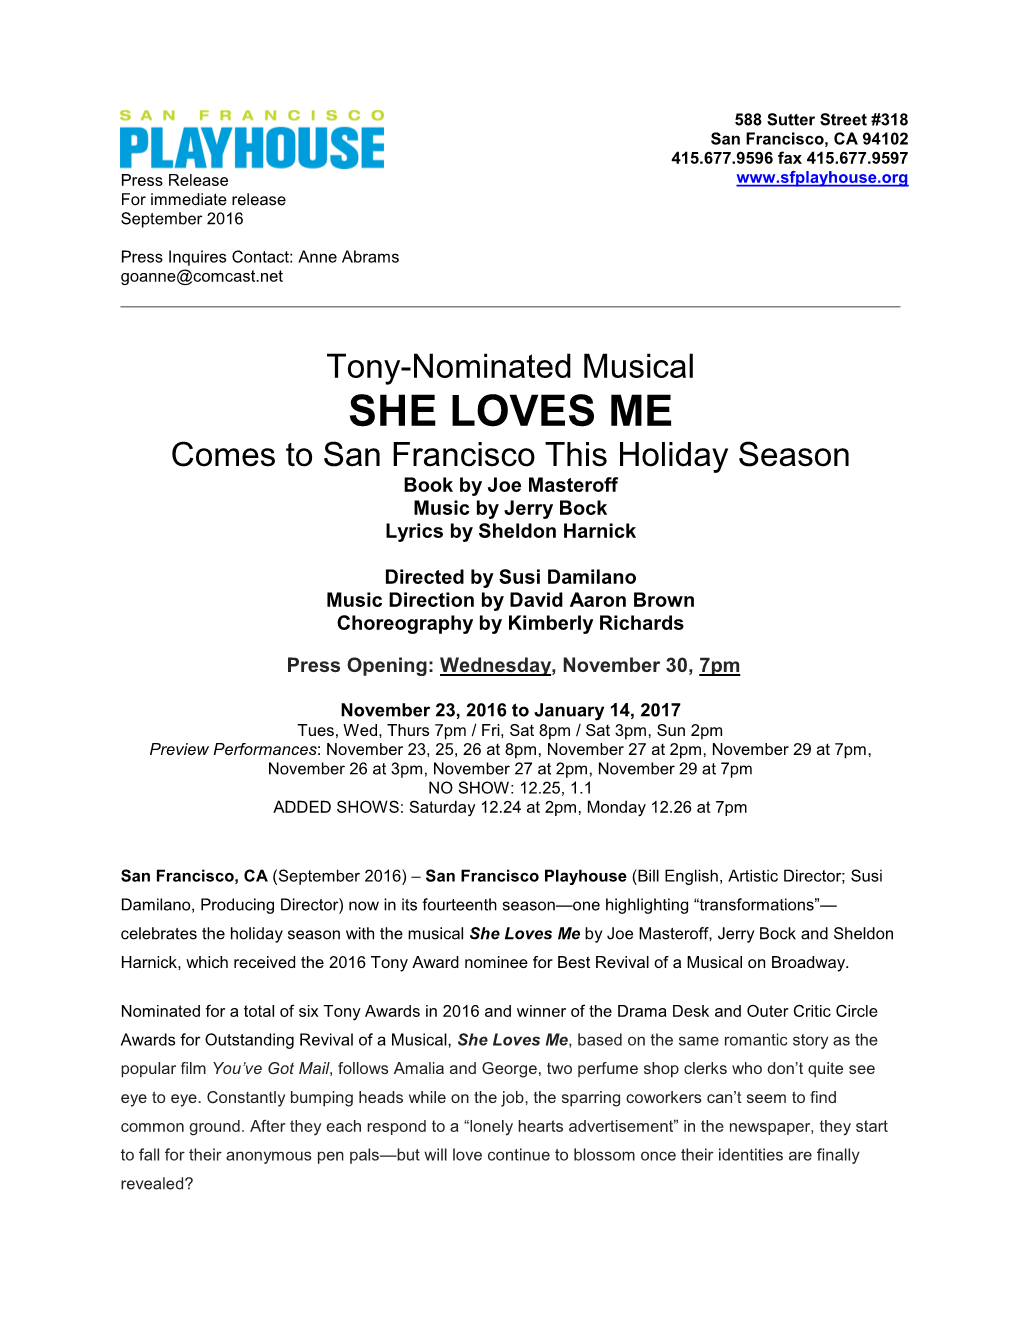 SHE LOVES ME Comes to San Francisco This Holiday Season Book by Joe Masteroff Music by Jerry Bock Lyrics by Sheldon Harnick